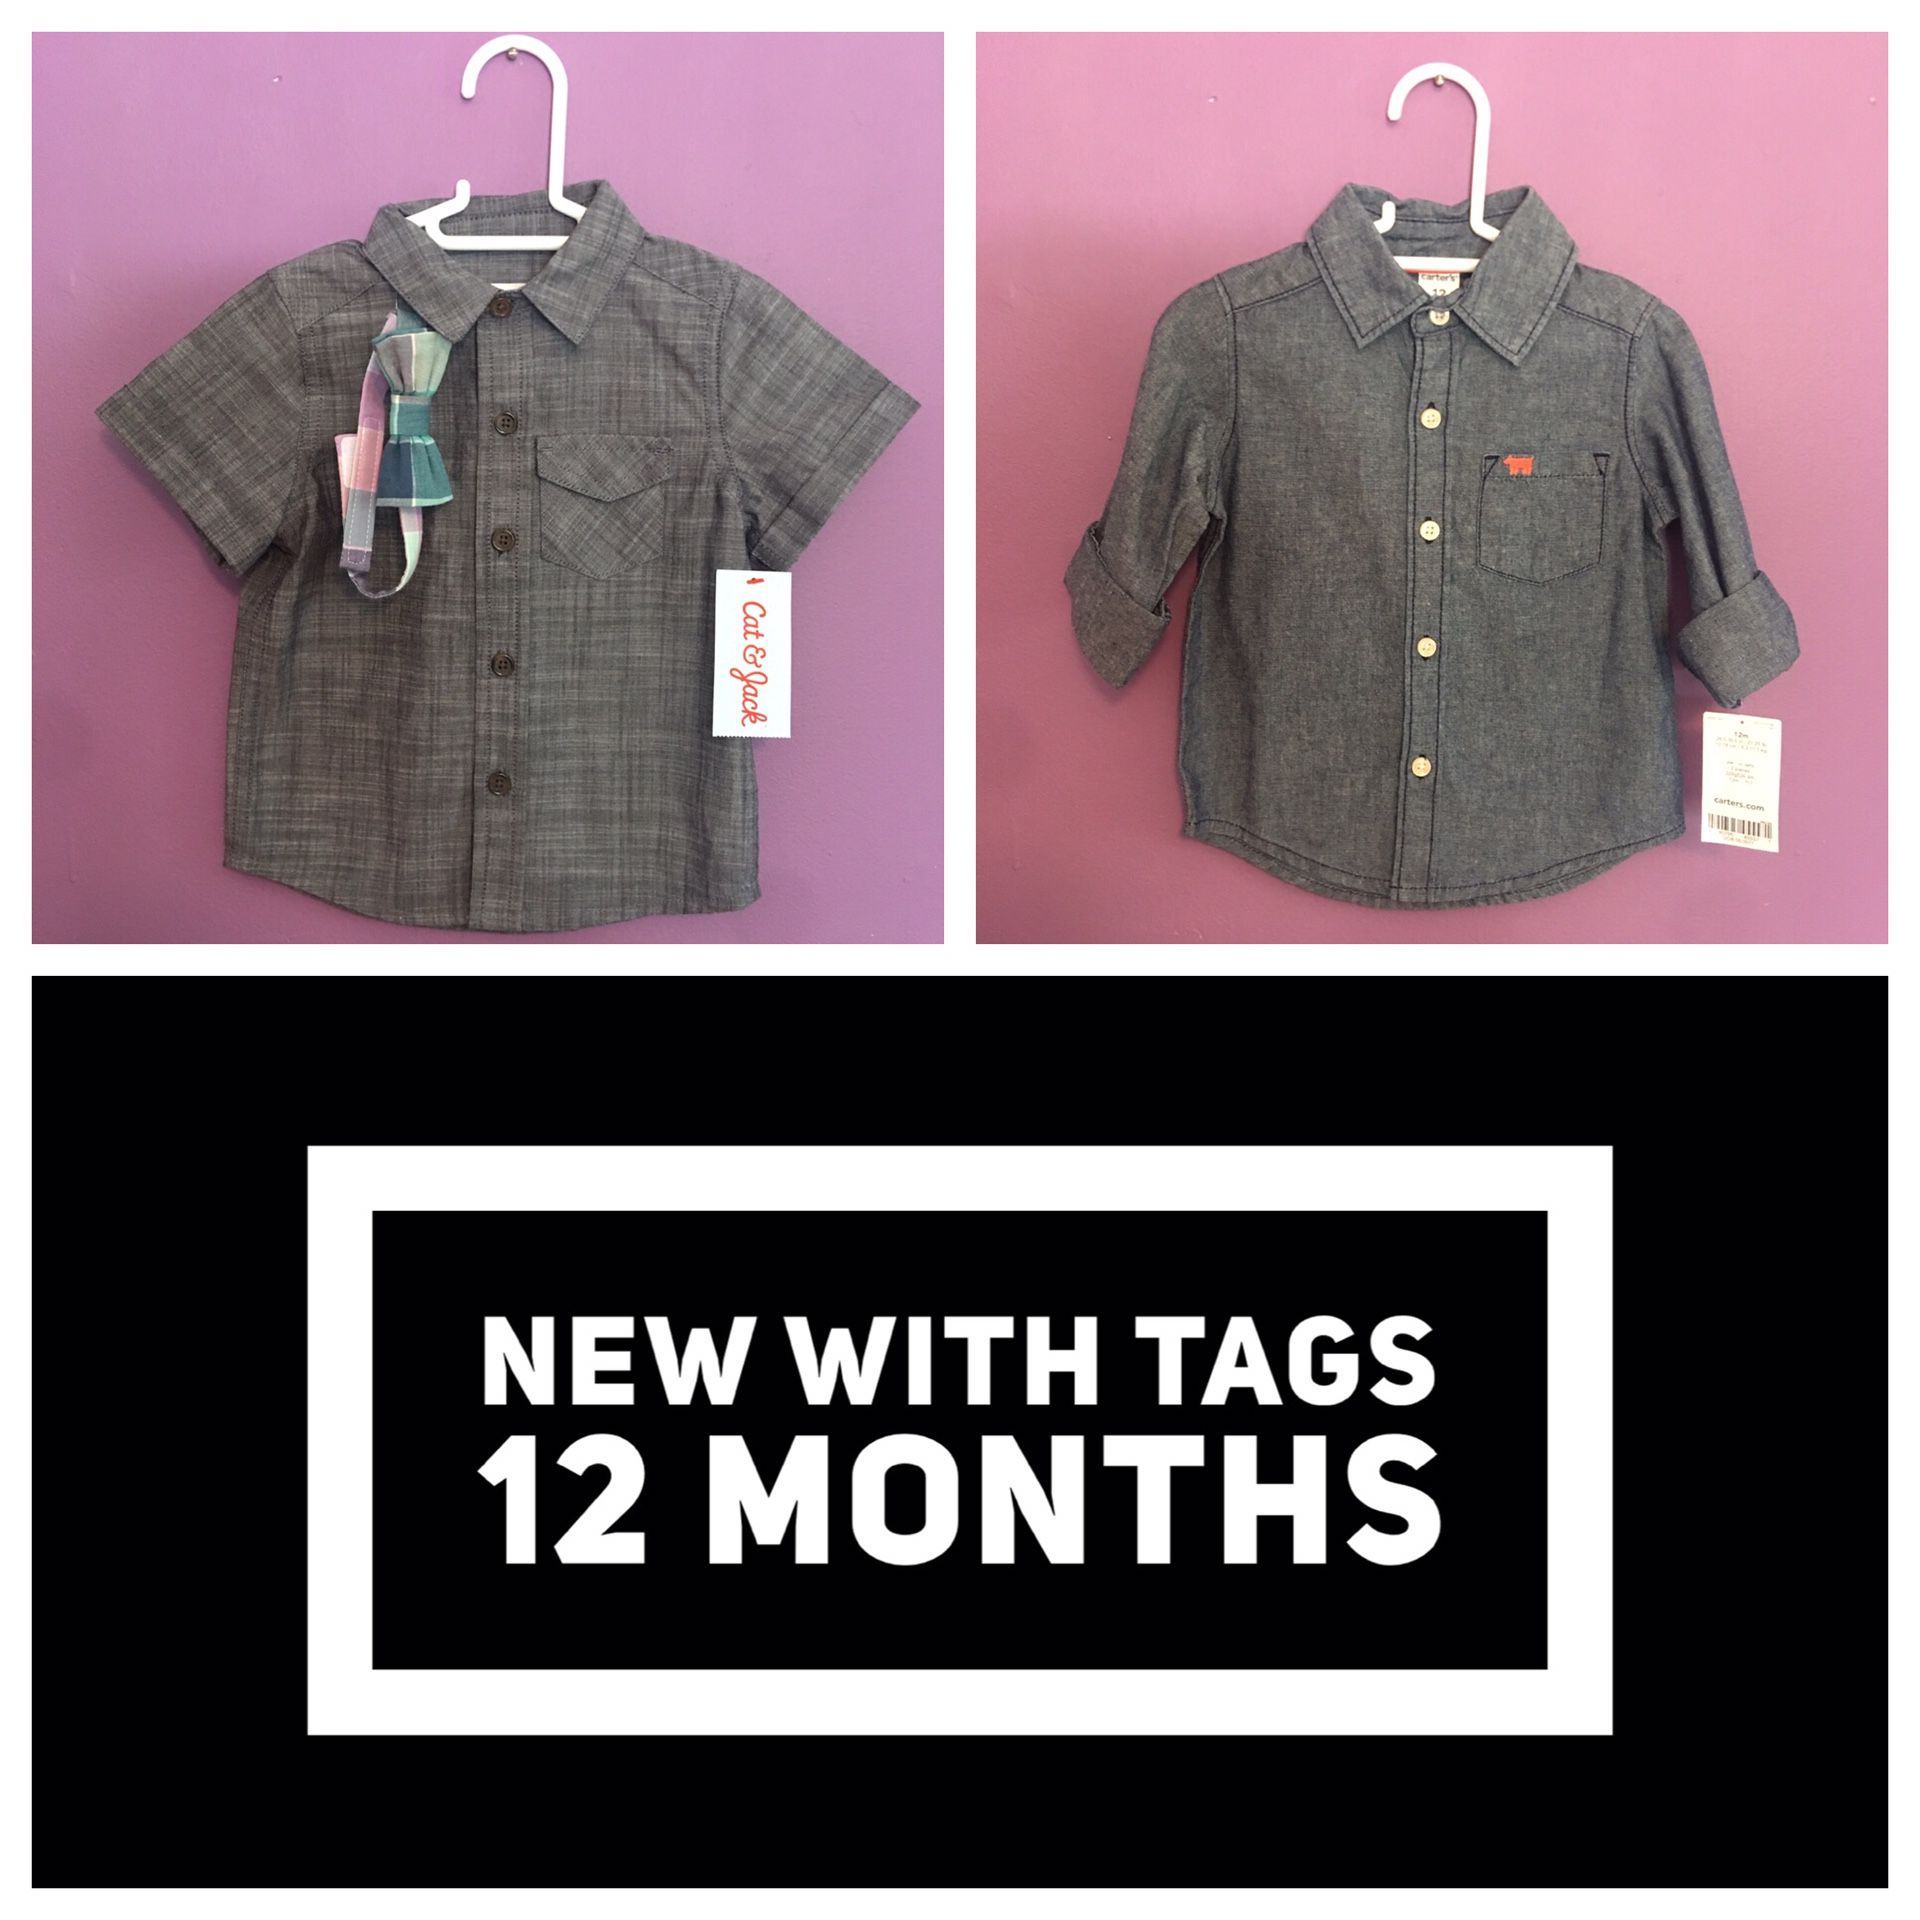 2 New With tags Baby Boy Dress Up Shirts | 12 Months